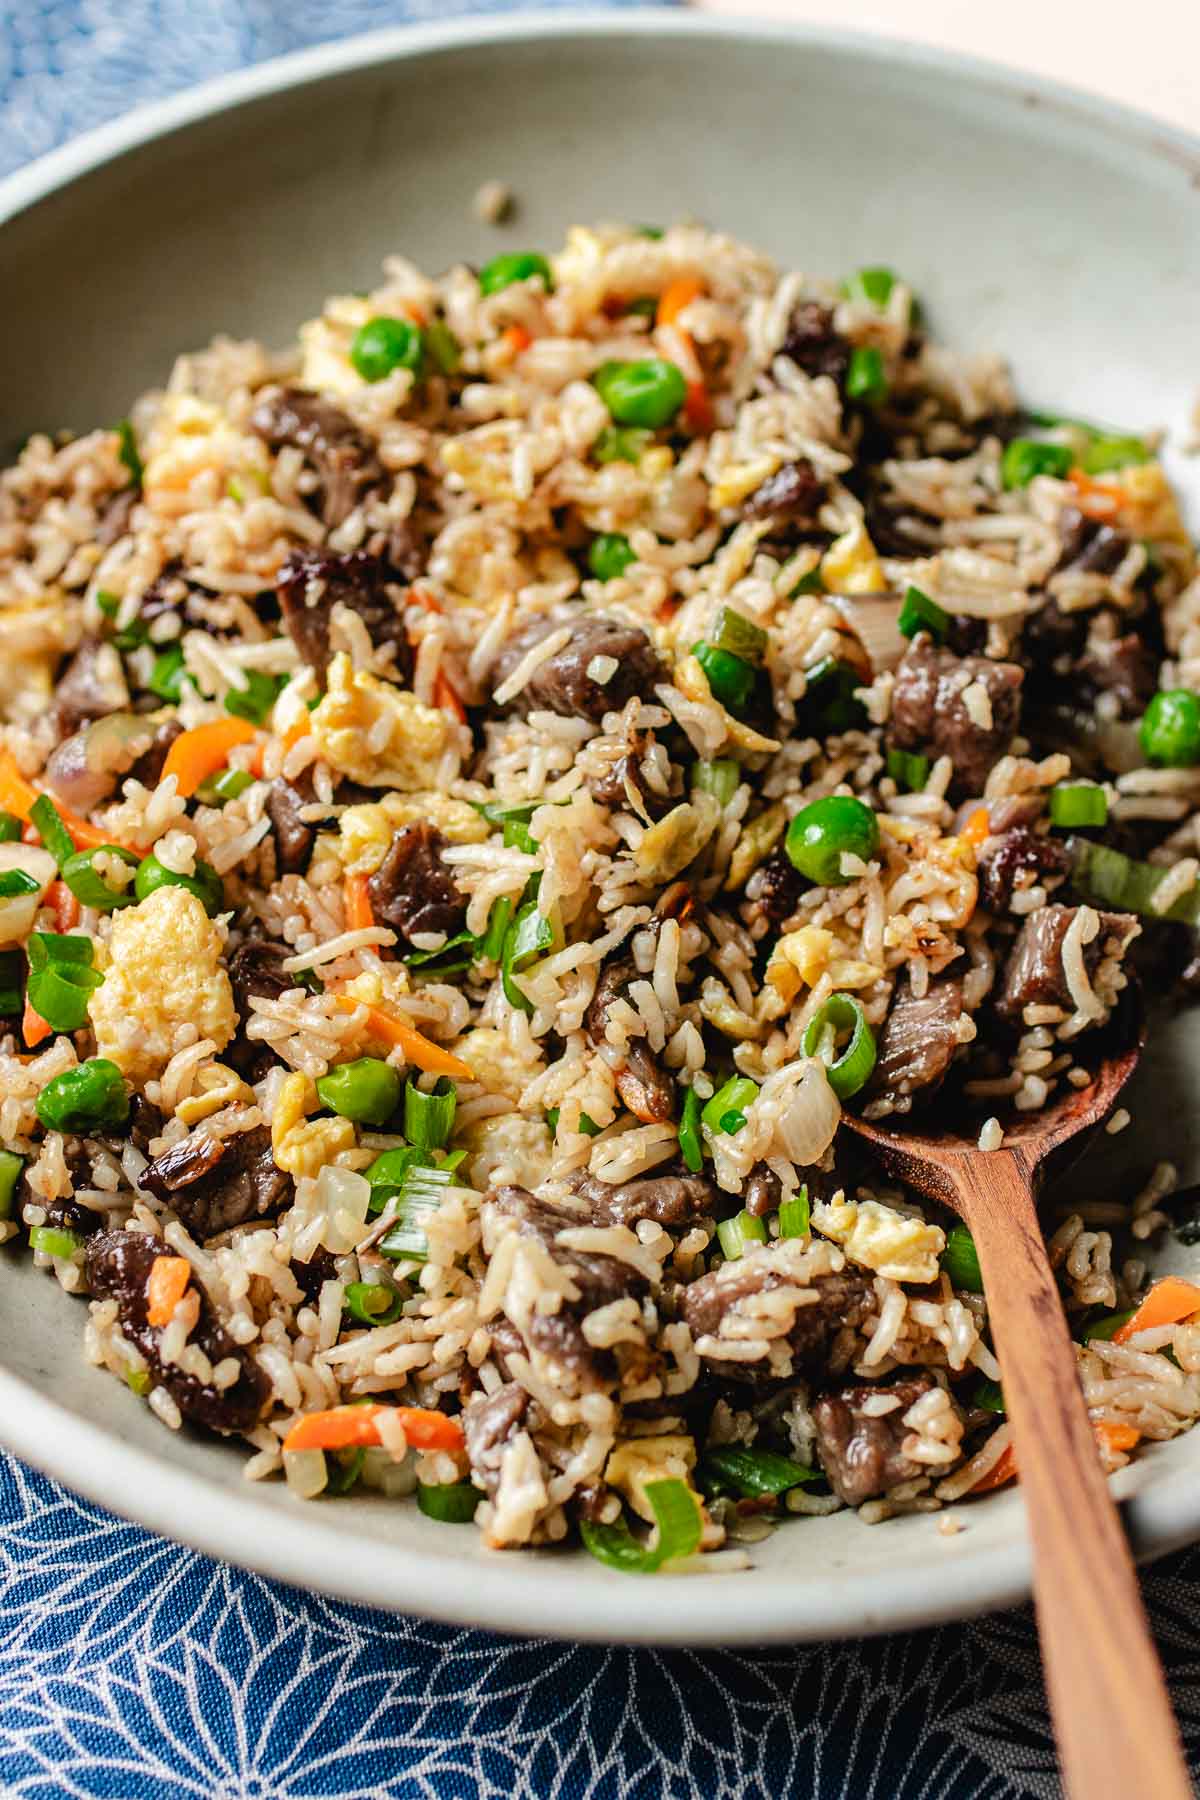 A side close shot image shows fried rice and steak Chinese style served on a plate.